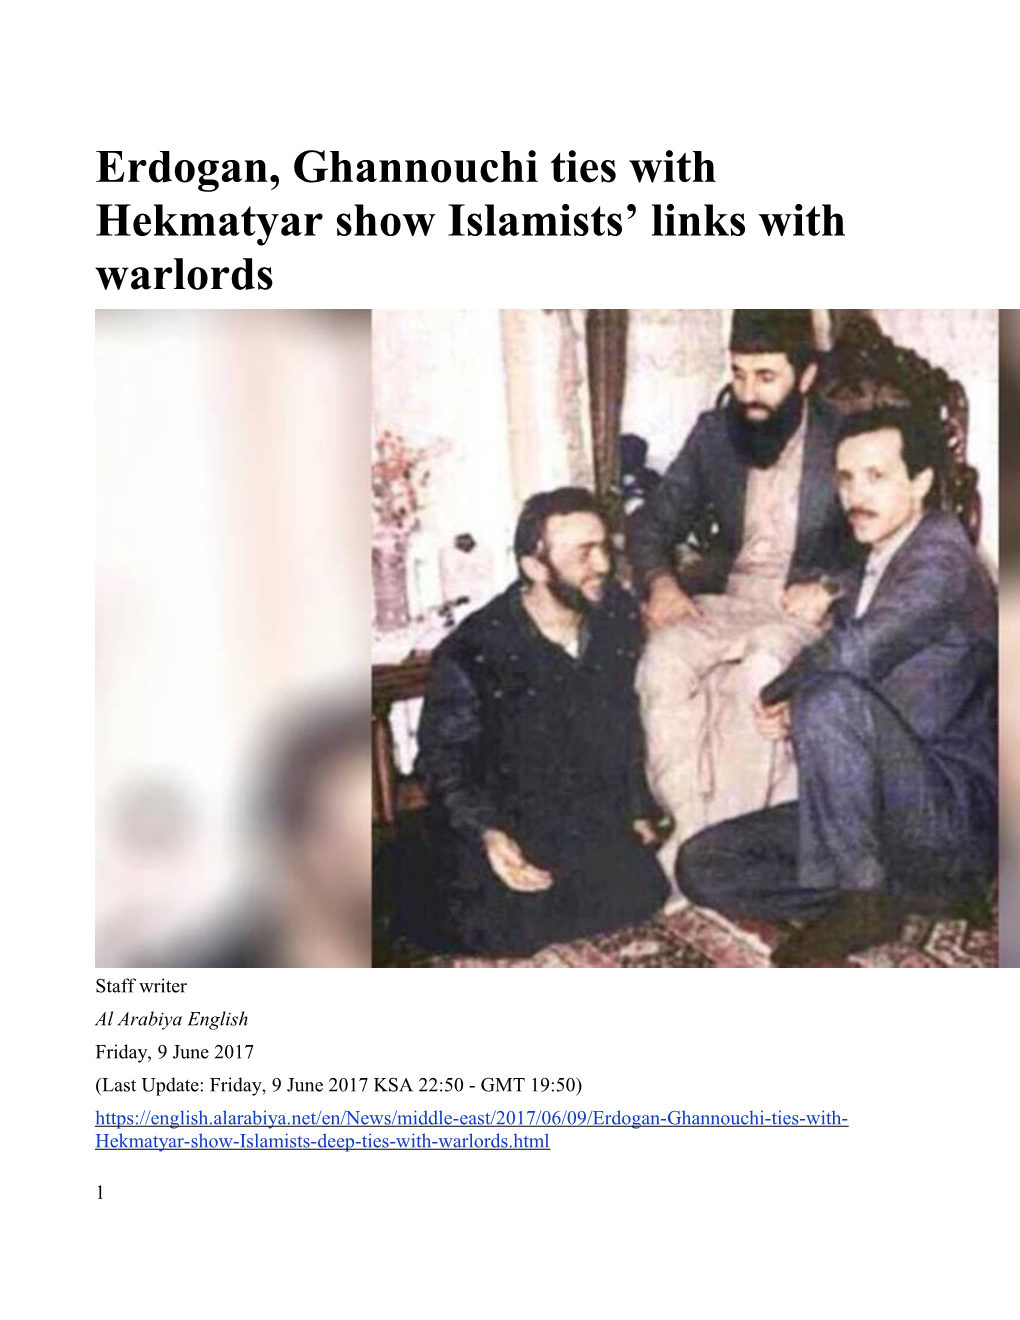 Erdogan, Ghannouchi Ties with Hekmatyar Show Islamists Links with Warlords